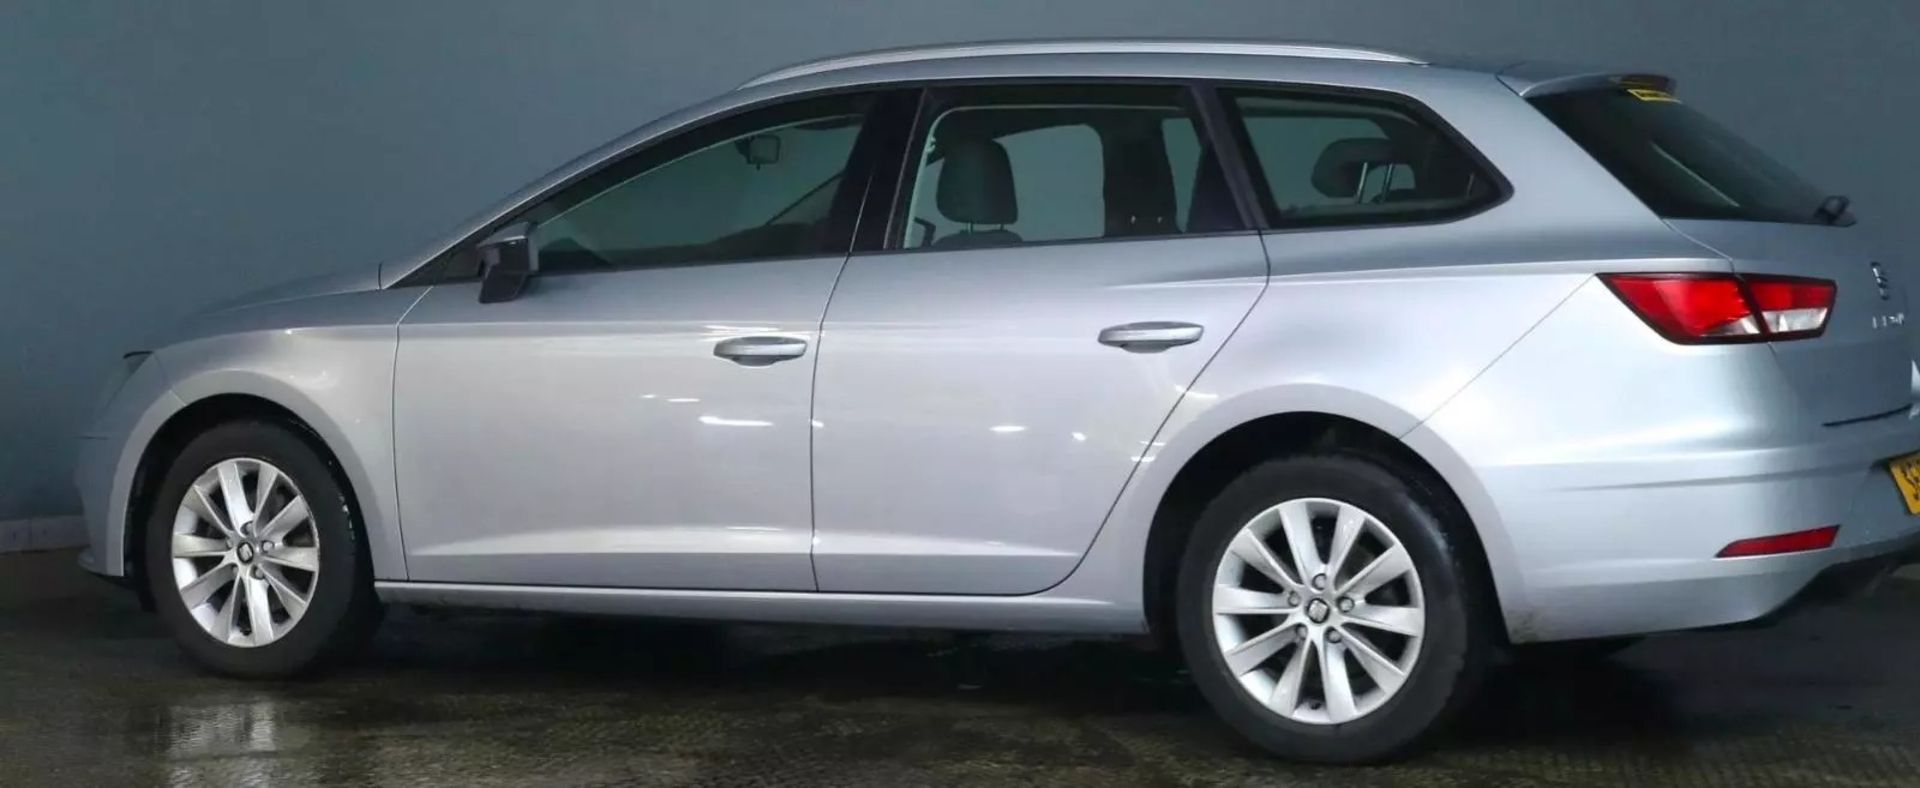 >>--NO VAT ON HAMMER--<< EFFICIENT 2019 SEAT LEON 1.6 TDI SE ESTATE - RELIABLE AND SPACIOUS! - Image 5 of 12